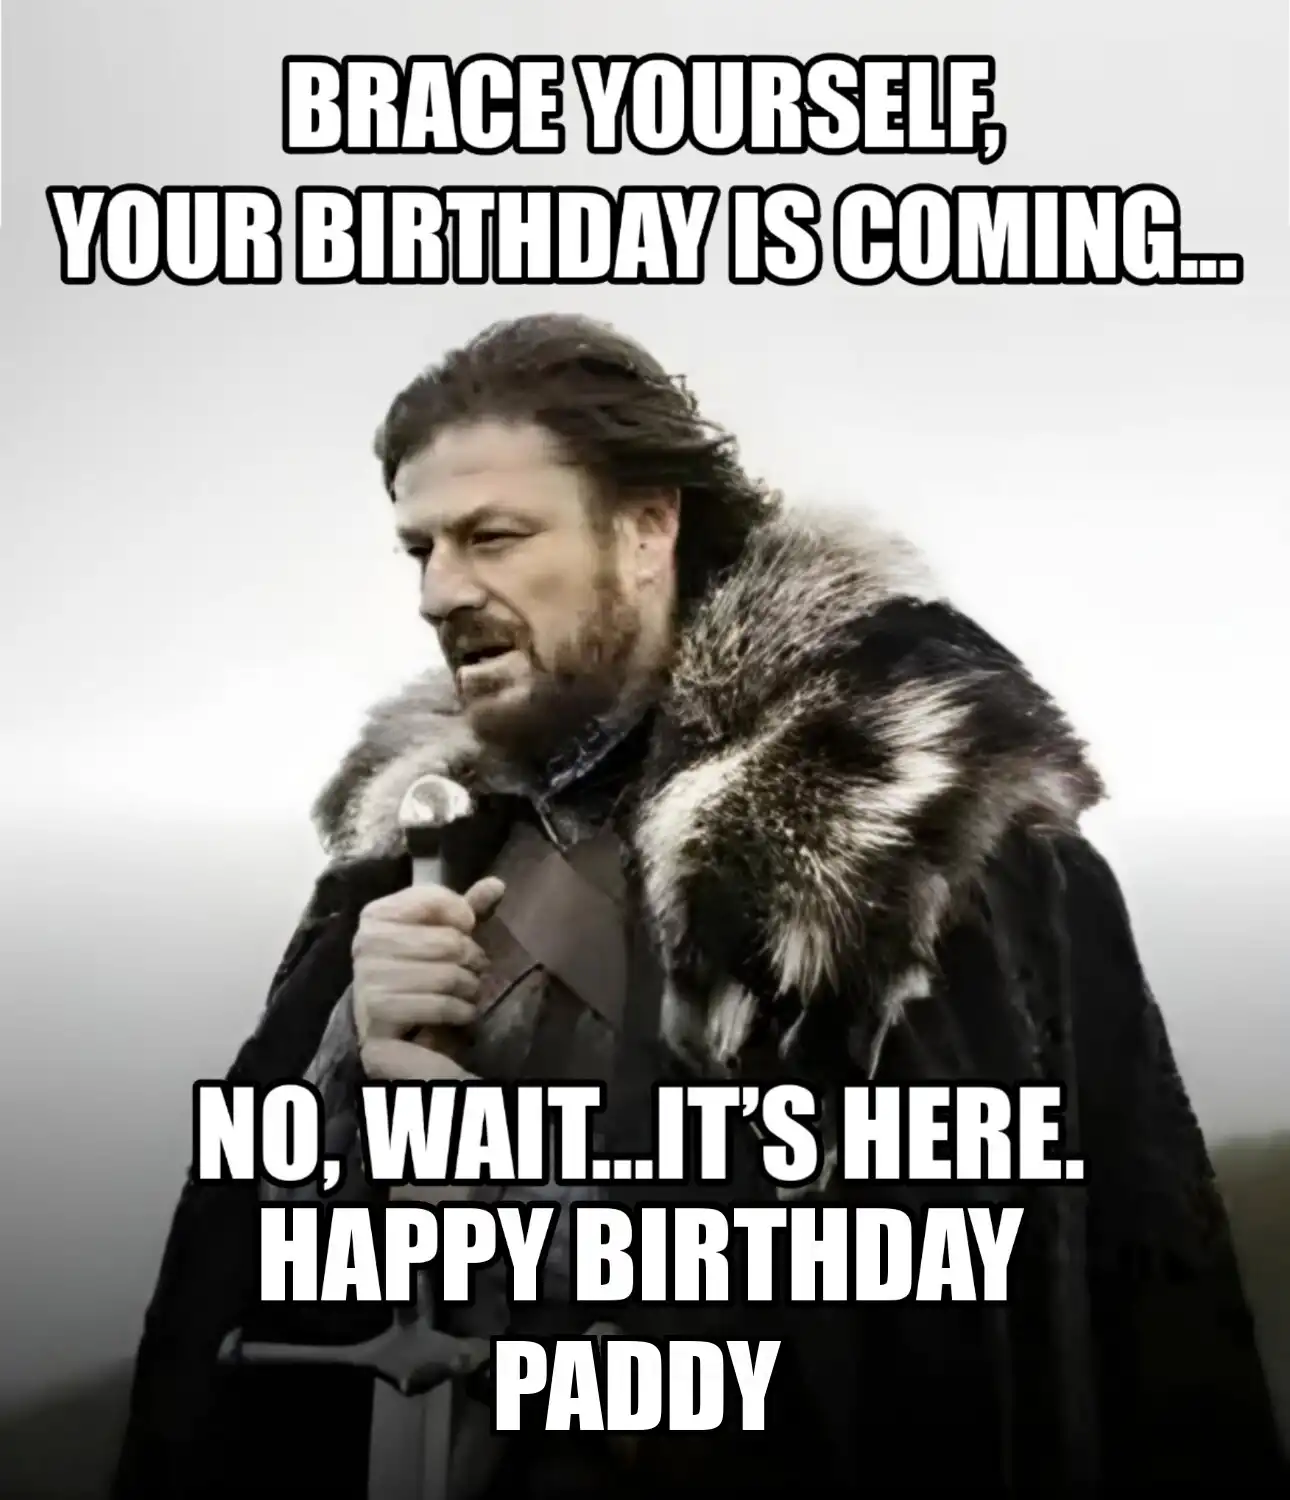 Happy Birthday Paddy Brace Yourself Your Birthday Is Coming Meme